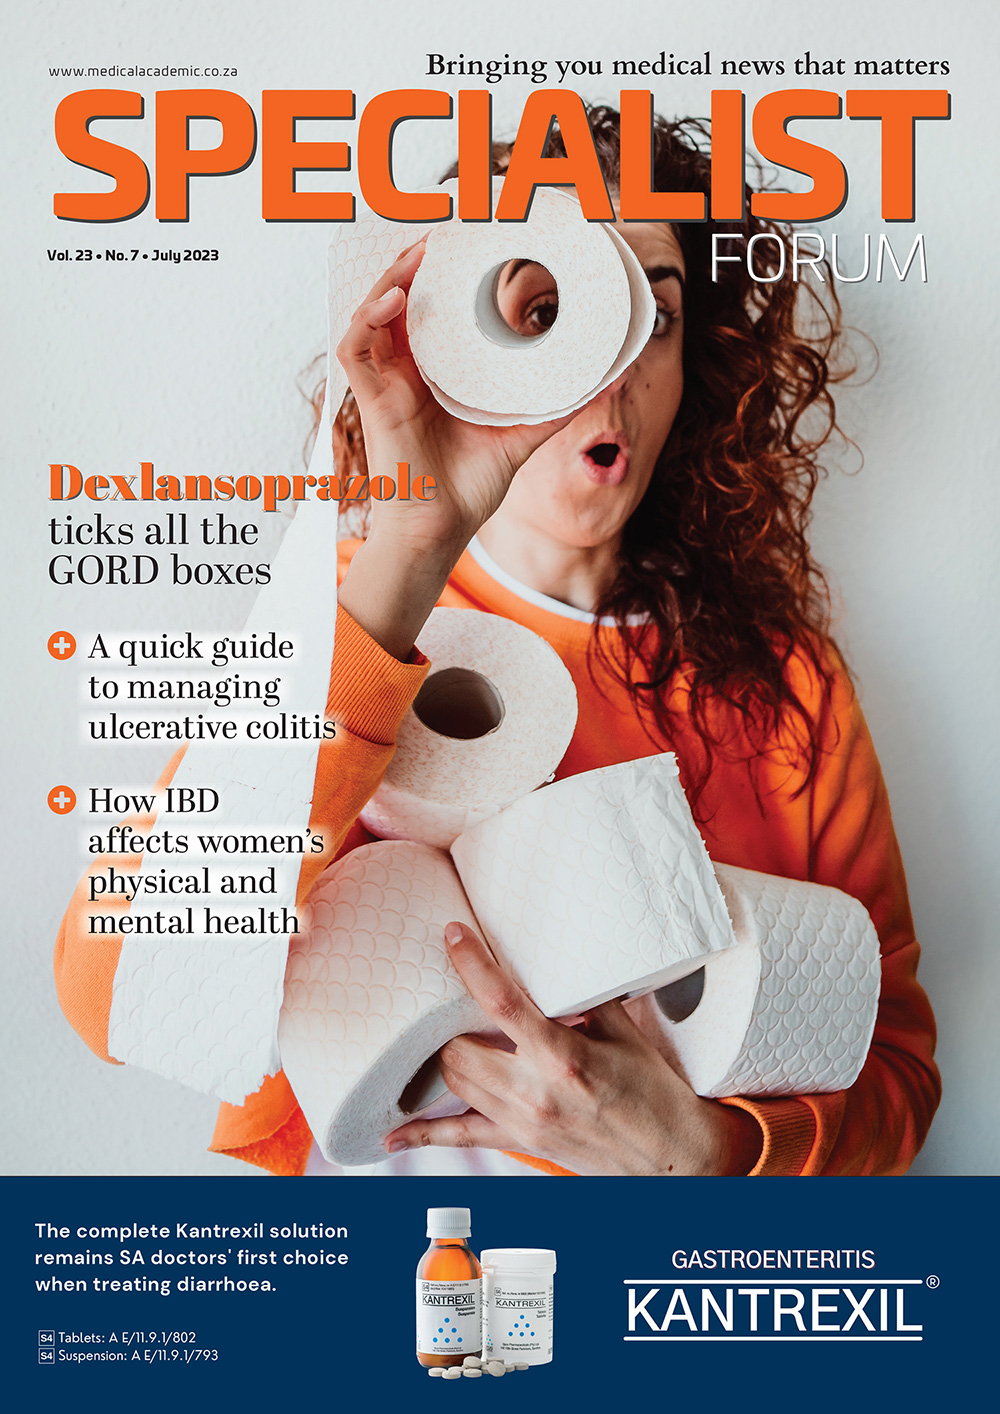 SFJulyCover